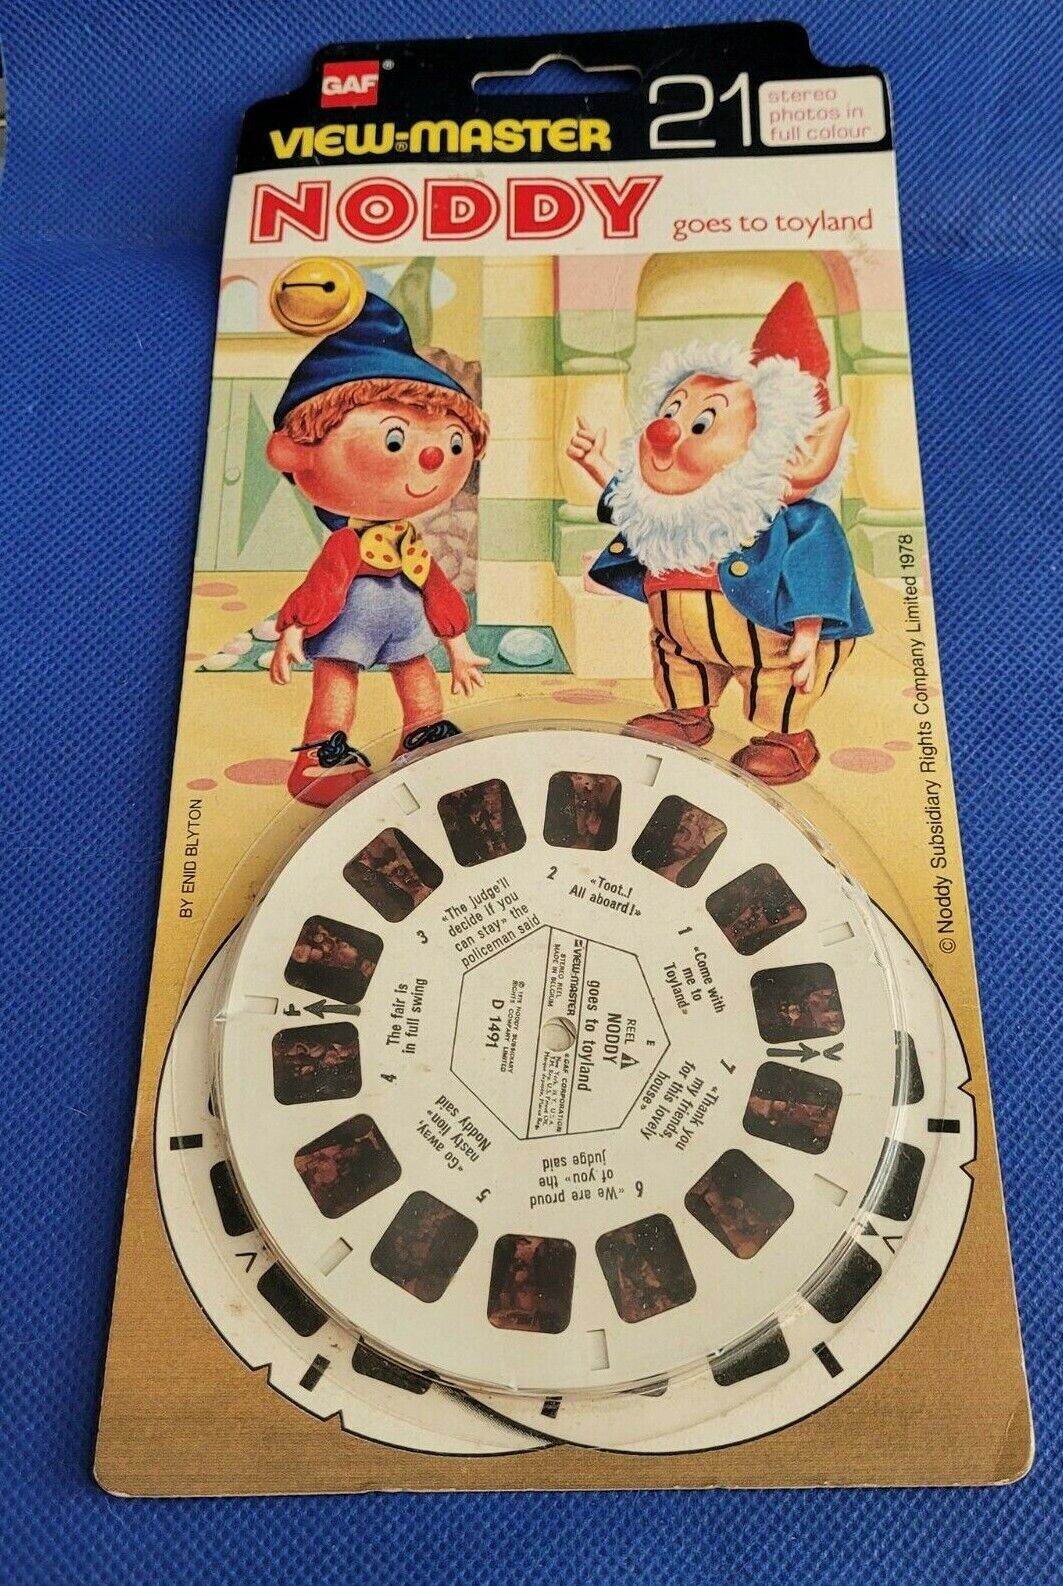 Rare opened D149 Noddy Goes to Toyland Book & TV Show view-master 3 Reels Pack